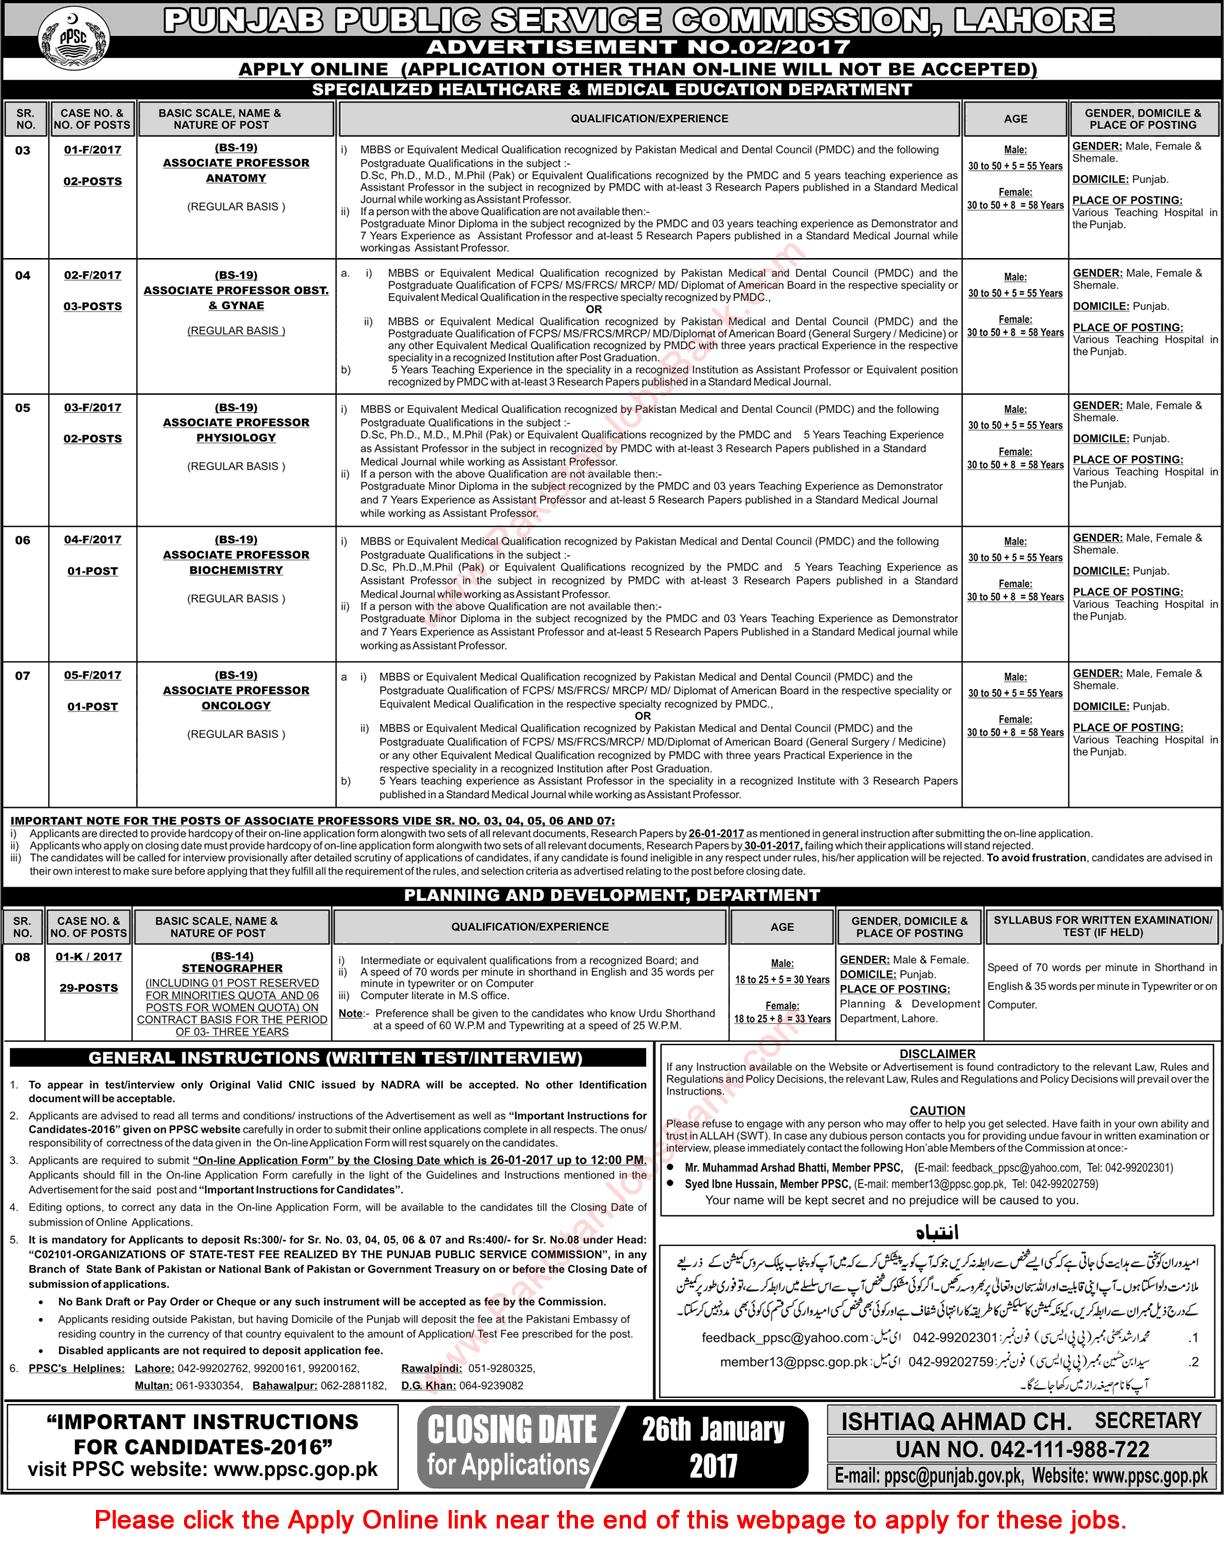 PPSC Jobs 2017 Consolidated Advertisement No 02/2017 2/2017 Apply Online Latest